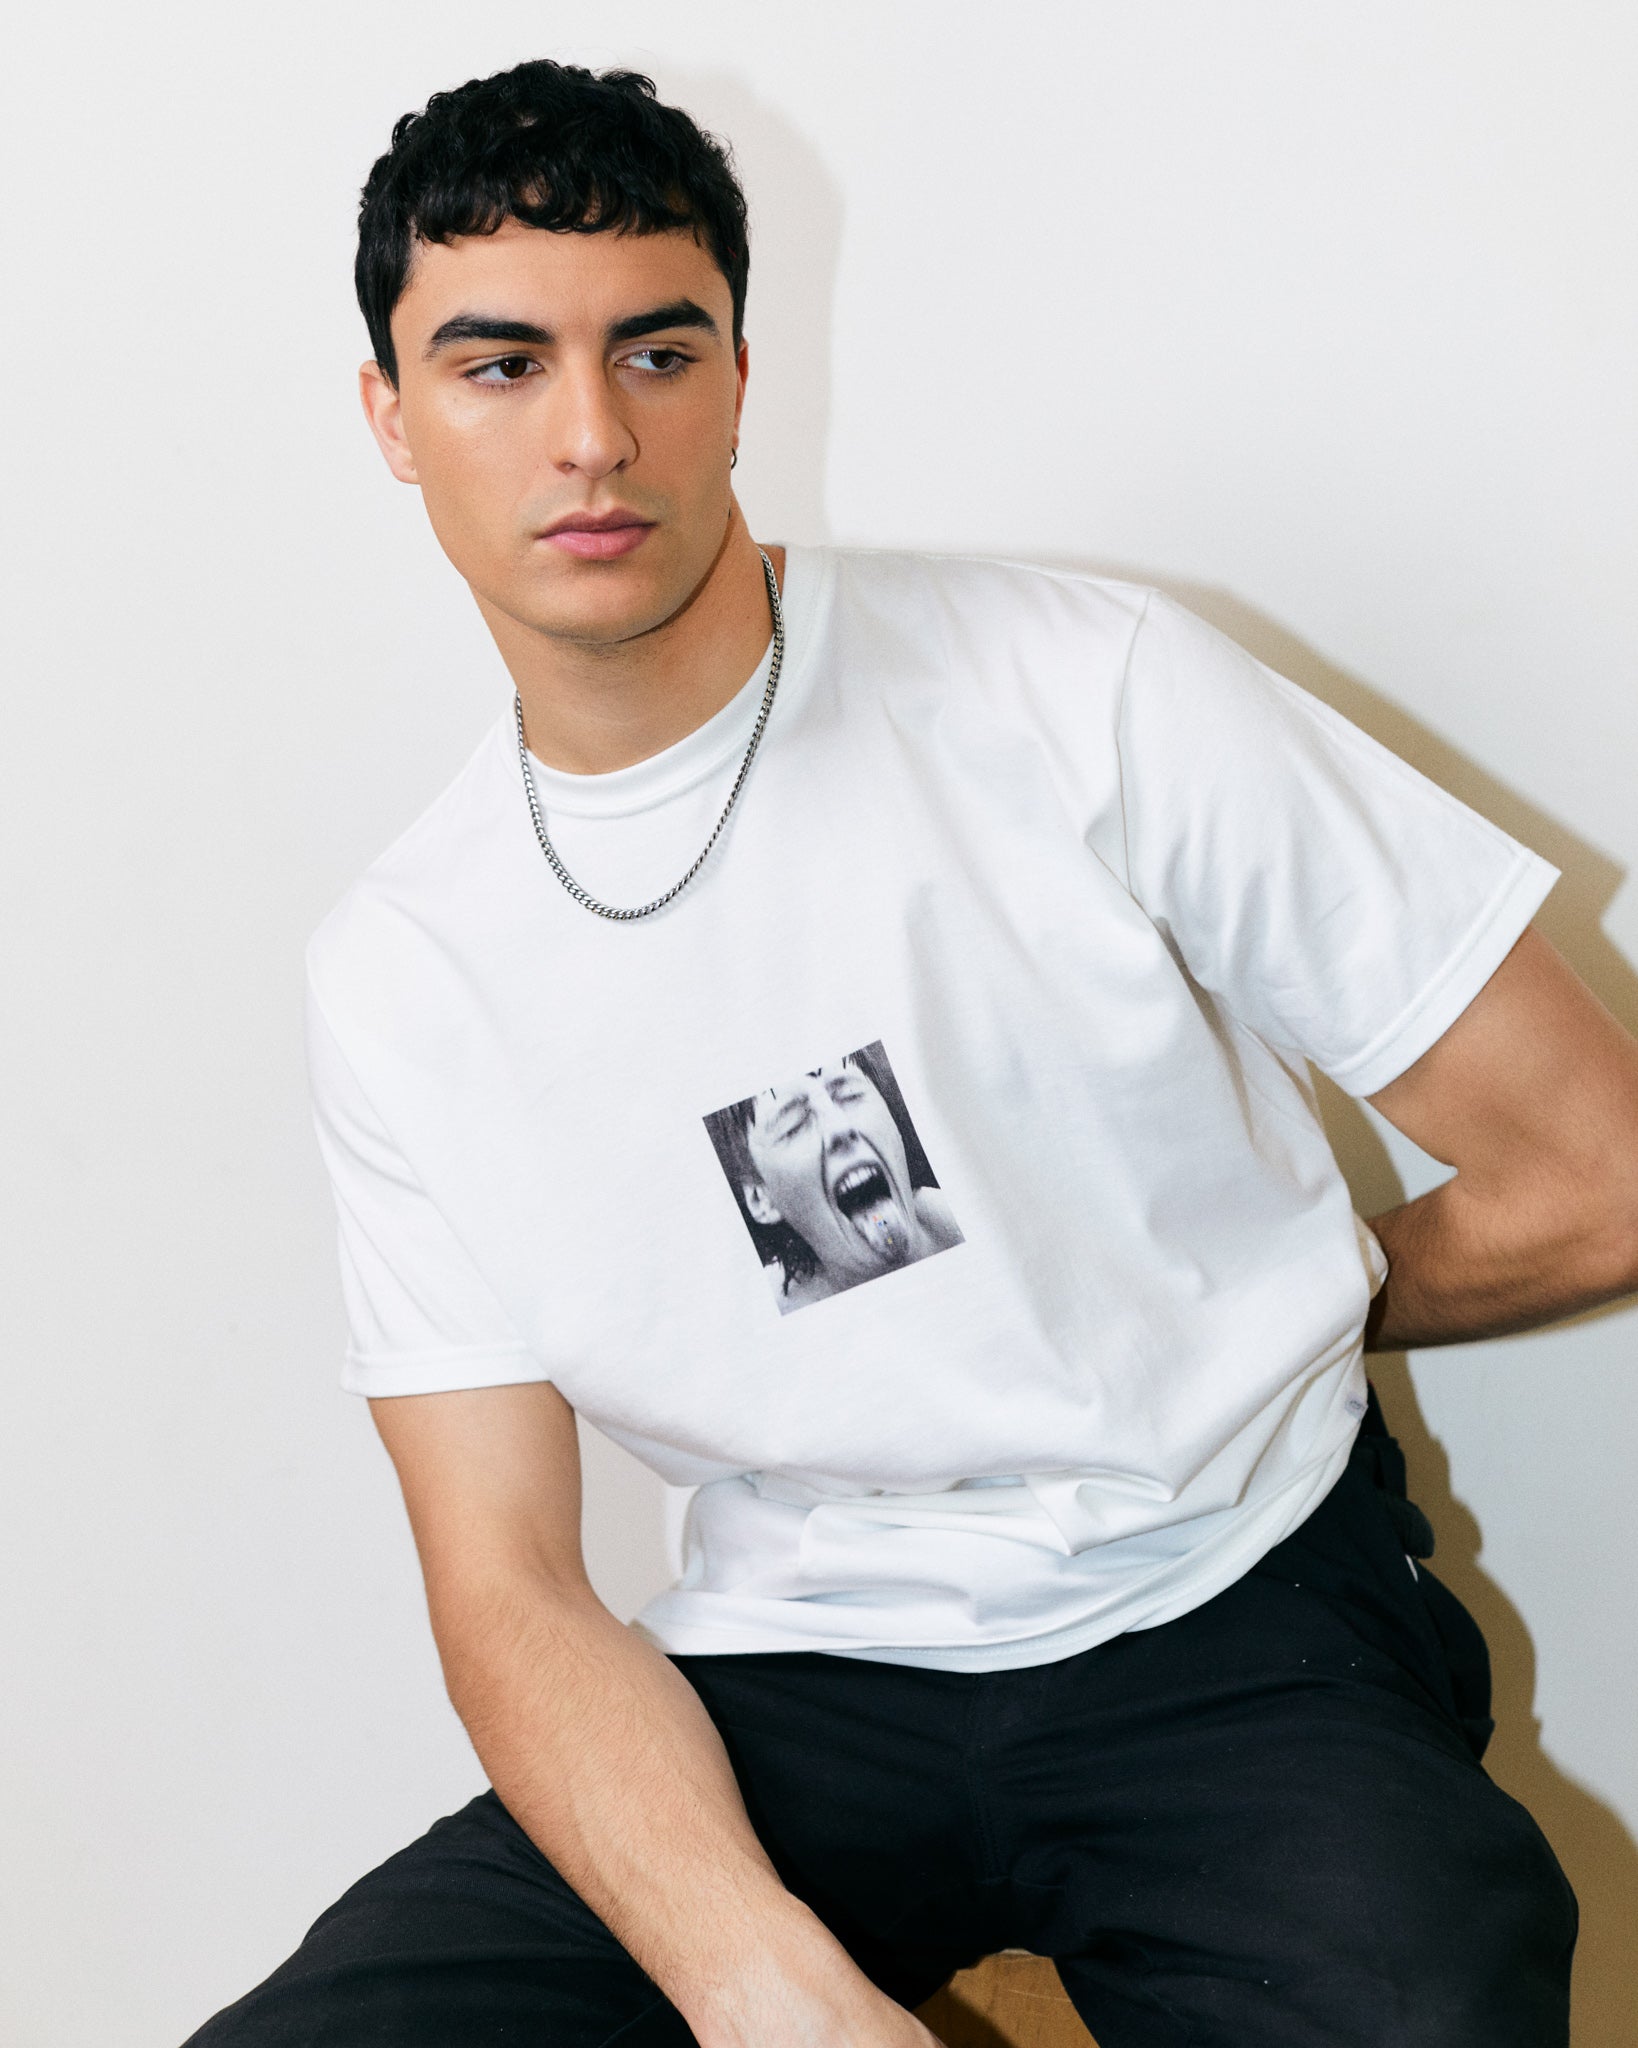 Arjang Mahdavi Wears 100% Cotton White Tee with Bauhaus Girl Student with Tongue Out and Bauhaus Graphic Text.